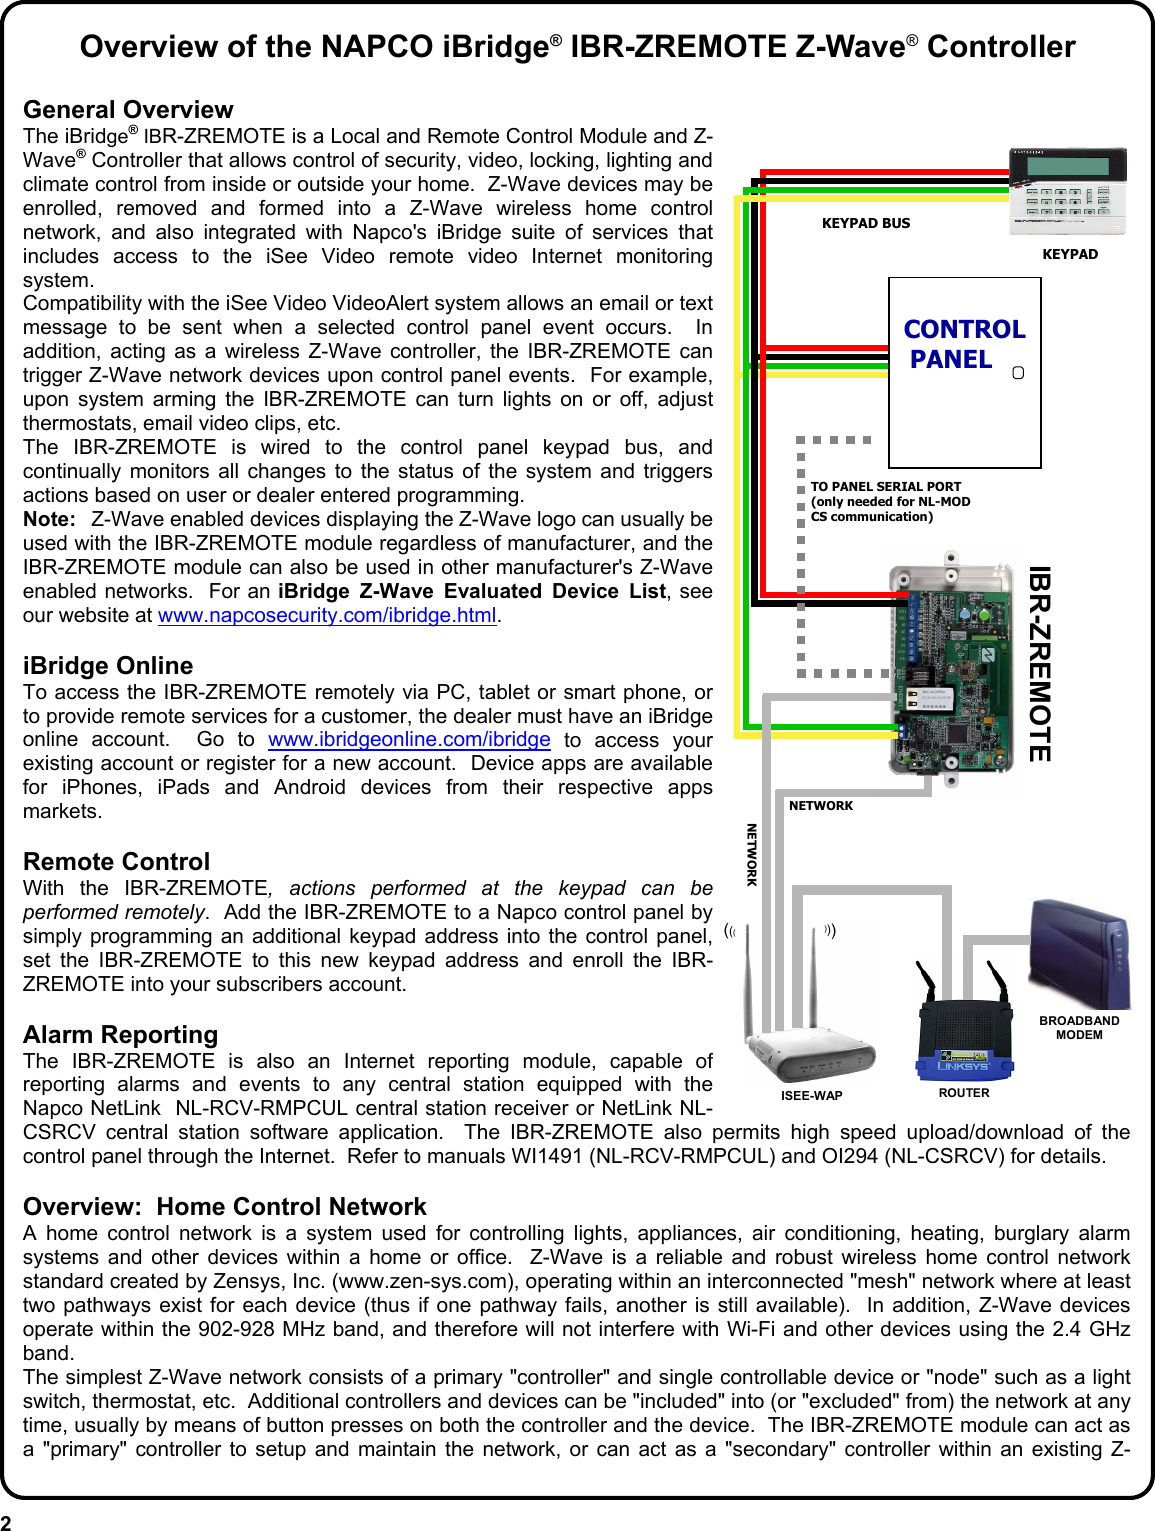 2 Overview of the NAPCO iBridge® IBR-ZREMOTE Z-Wave® Controller General Overview The iBridge® IBR-ZREMOTE is a Local and Remote Control Module and Z-Wave® Controller that allows control of security, video, locking, lighting and climate control from inside or outside your home.  Z-Wave devices may be enrolled, removed and formed into a Z-Wave wireless home control network, and also integrated with Napco&apos;s iBridge suite of services that includes access to the iSee Video remote video Internet monitoring system. Compatibility with the iSee Video VideoAlert system allows an email or text message to be sent when a selected control panel event occurs.  In addition, acting as a wireless Z-Wave controller, the IBR-ZREMOTE can trigger Z-Wave network devices upon control panel events.  For example, upon system arming the IBR-ZREMOTE can turn lights on or off, adjust thermostats, email video clips, etc. The IBR-ZREMOTE is wired to the control panel keypad bus, and continually monitors all changes to the status of the system and triggers actions based on user or dealer entered programming.   Note:  Z-Wave enabled devices displaying the Z-Wave logo can usually be used with the IBR-ZREMOTE module regardless of manufacturer, and the IBR-ZREMOTE module can also be used in other manufacturer&apos;s Z-Wave enabled networks.  For an iBridge Z-Wave Evaluated Device List, see our website at www.napcosecurity.com/ibridge.html.  iBridge Online To access the IBR-ZREMOTE remotely via PC, tablet or smart phone, or to provide remote services for a customer, the dealer must have an iBridge online account.  Go to www.ibridgeonline.com/ibridge to access your existing account or register for a new account.  Device apps are available for iPhones, iPads and Android devices from their respective apps markets.    Remote Control With the IBR-ZREMOTE, actions performed at the keypad can be performed remotely.  Add the IBR-ZREMOTE to a Napco control panel by simply programming an additional keypad address into the control panel, set the IBR-ZREMOTE to this new keypad address and enroll the IBR-ZREMOTE into your subscribers account.    Alarm Reporting The IBR-ZREMOTE is also an Internet reporting module, capable of reporting alarms and events to any central station equipped with the Napco NetLink  NL-RCV-RMPCUL central station receiver or NetLink NL-CSRCV central station software application.  The IBR-ZREMOTE also permits high speed upload/download of the control panel through the Internet.  Refer to manuals WI1491 (NL-RCV-RMPCUL) and OI294 (NL-CSRCV) for details.  Overview:  Home Control Network  A home control network is a system used for controlling lights, appliances, air conditioning, heating, burglary alarm systems and other devices within a home or office.  Z-Wave is a reliable and robust wireless home control network standard created by Zensys, Inc. (www.zen-sys.com), operating within an interconnected &quot;mesh&quot; network where at least two pathways exist for each device (thus if one pathway fails, another is still available).  In addition, Z-Wave devices operate within the 902-928 MHz band, and therefore will not interfere with Wi-Fi and other devices using the 2.4 GHz band. The simplest Z-Wave network consists of a primary &quot;controller&quot; and single controllable device or &quot;node&quot; such as a light switch, thermostat, etc.  Additional controllers and devices can be &quot;included&quot; into (or &quot;excluded&quot; from) the network at any time, usually by means of button presses on both the controller and the device.  The IBR-ZREMOTE module can act as a &quot;primary&quot; controller to setup and maintain the network, or can act as a &quot;secondary&quot; controller within an existing Z- KEYPAD BUS ROUTER  BROADBAND MODEM TO PANEL SERIAL PORT (only needed for NL-MOD CS communication)  CONTROL PANEL KEYPAD IBR-ZREMOTE NETWORK ISEE-WAP ((( ((( NETWORK 